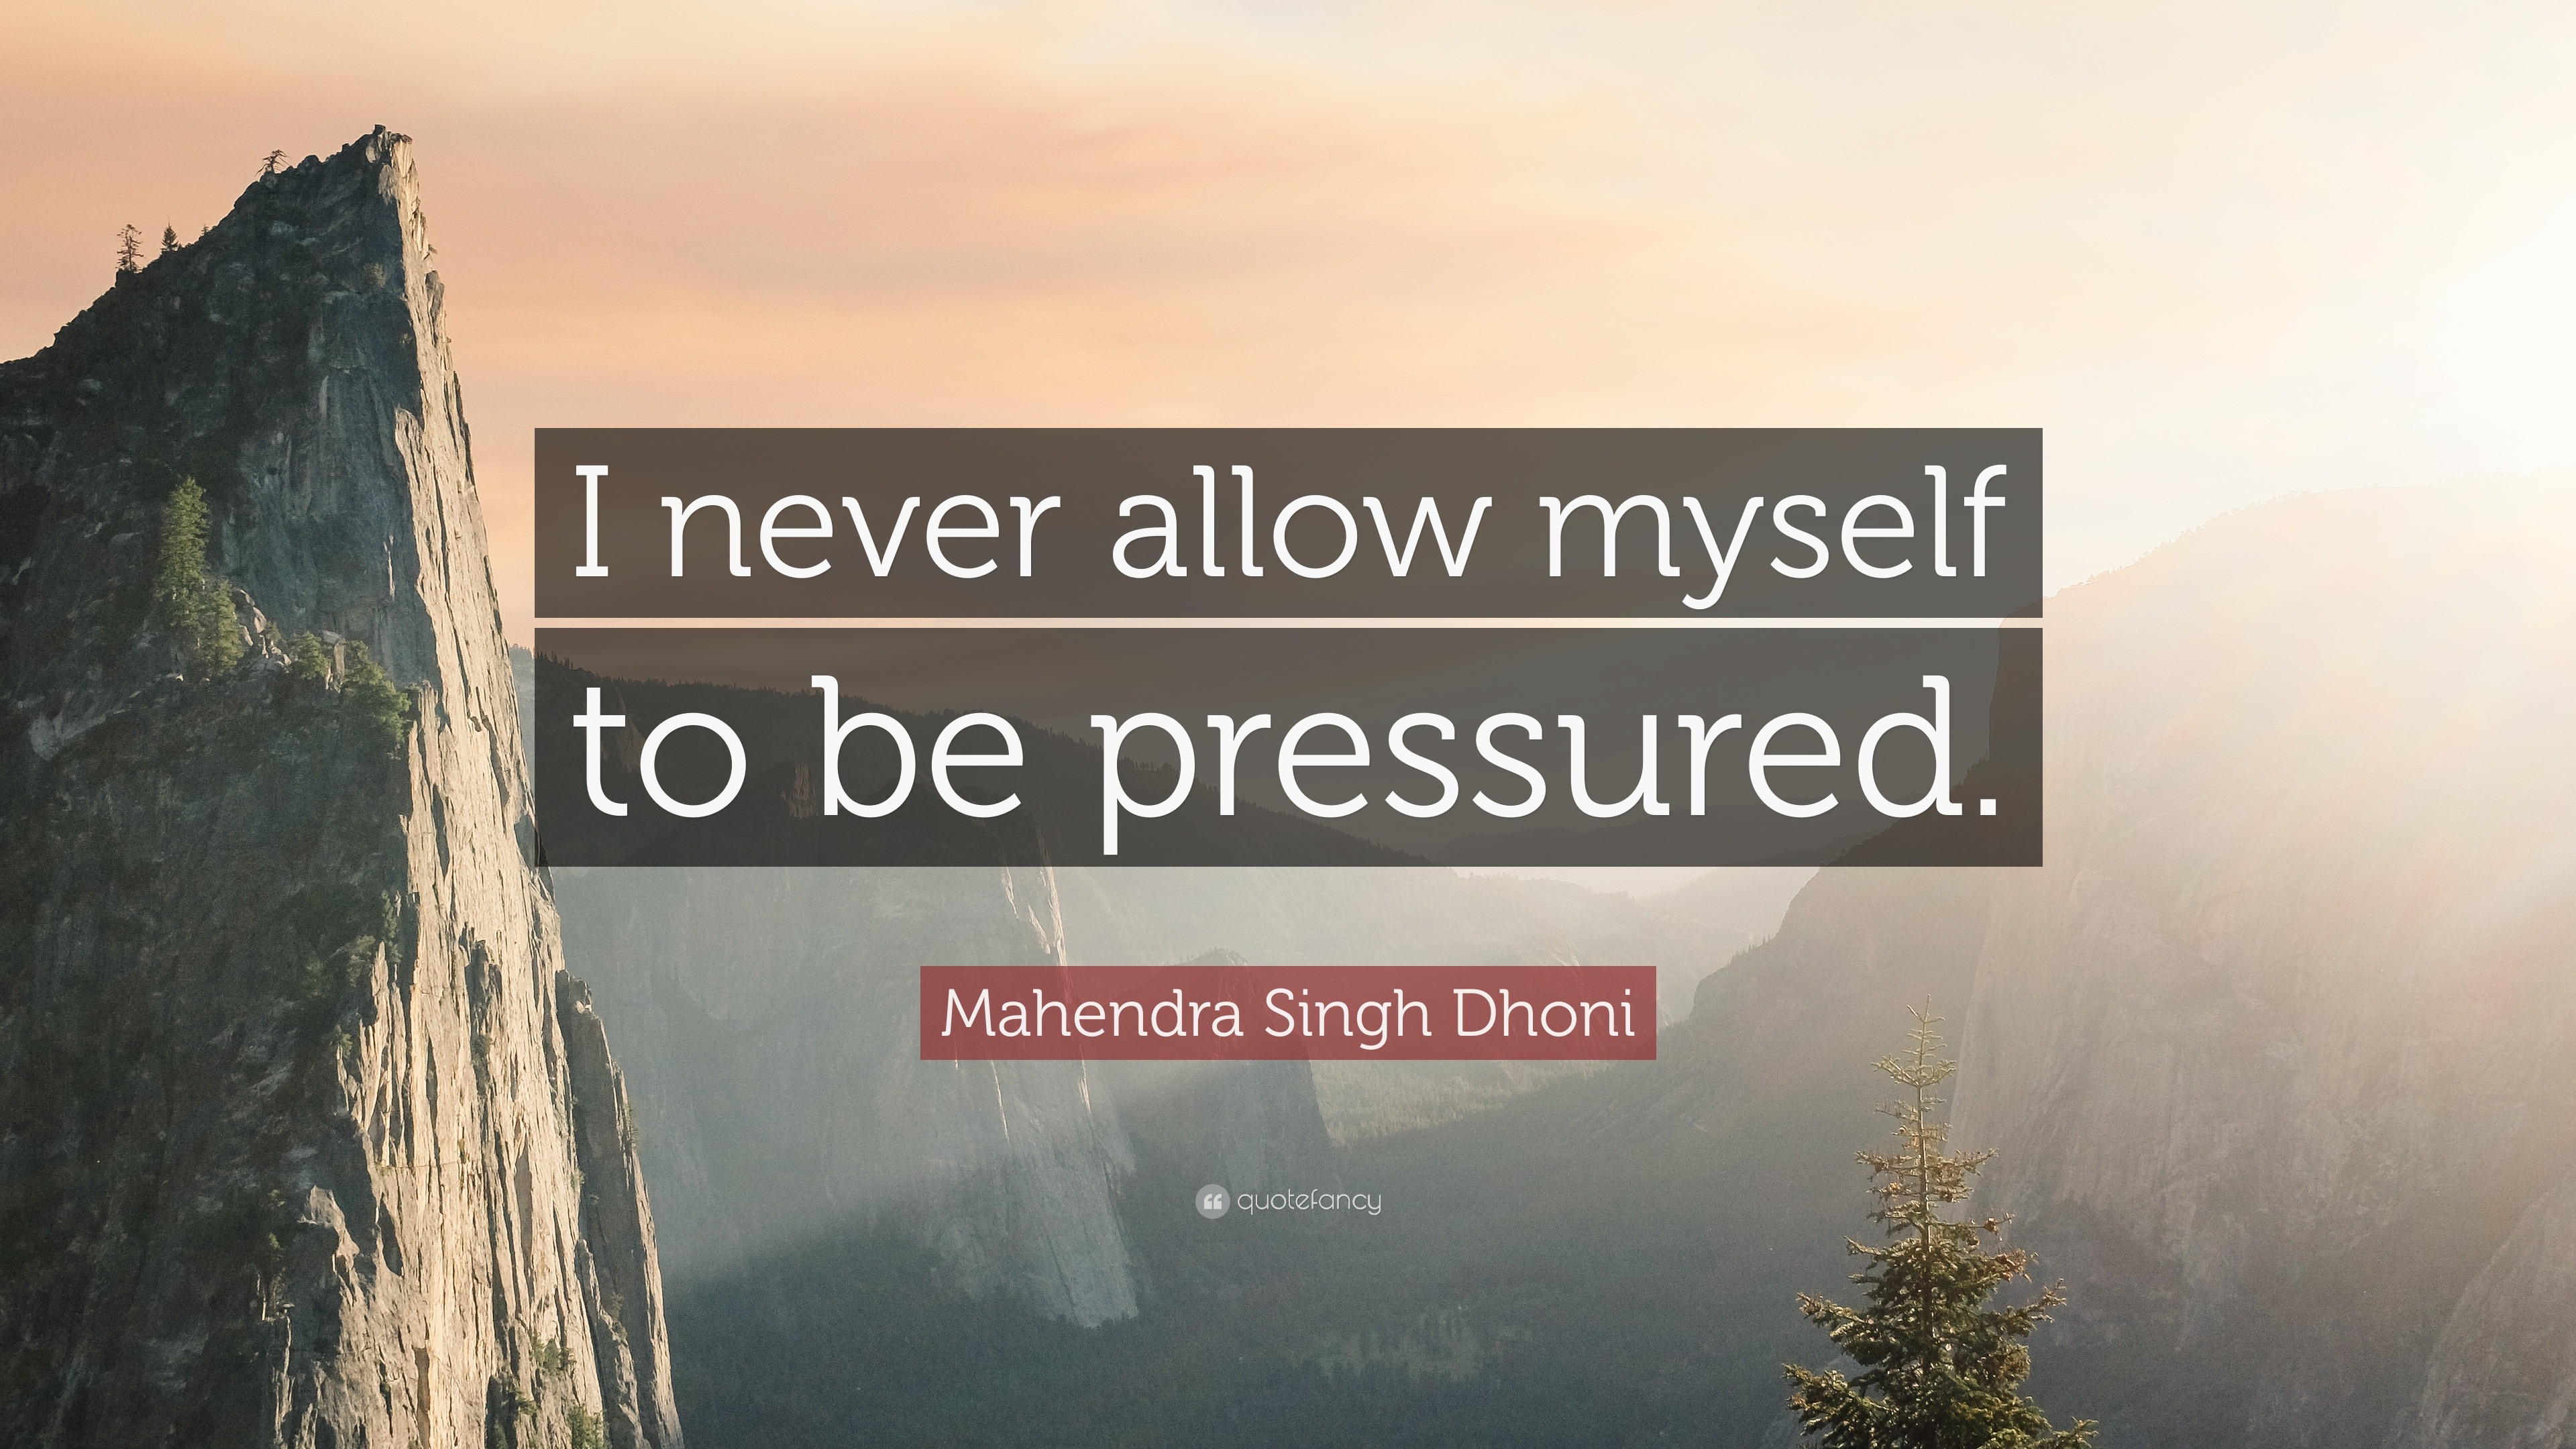 Top 10 Mahendra Singh Dhoni Quotes (2023 Update) - Quotefancy